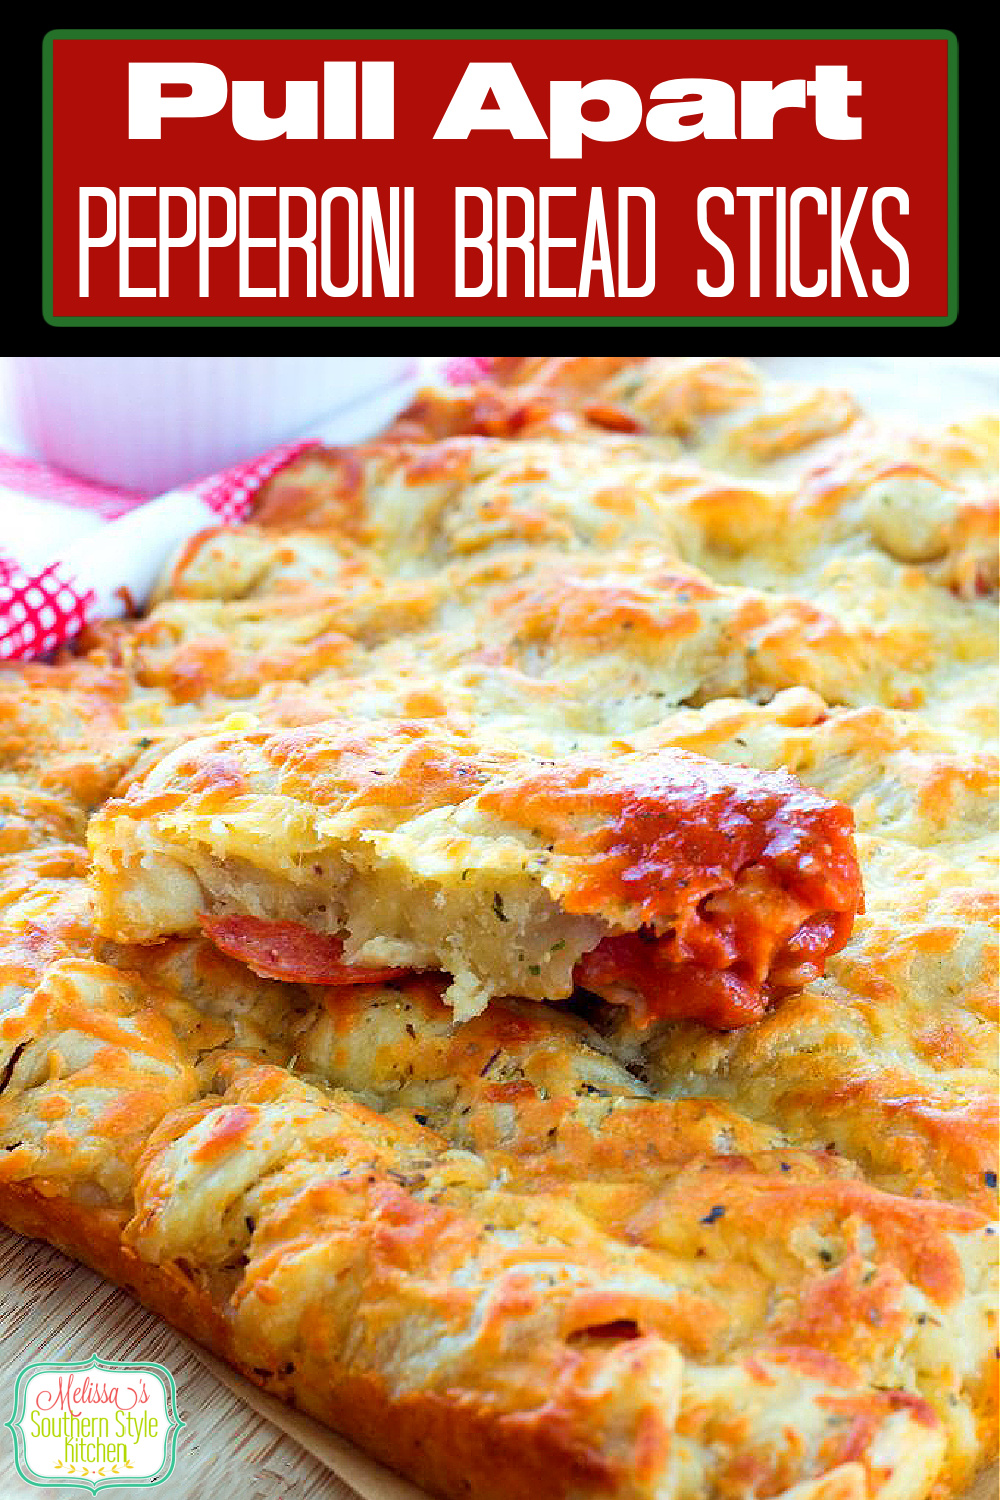 Serve these Pull Apart Pepperoni Bread Sticks as an appetizer or snack #pepperonibreadsticks #pullapartbread #pepperonibread #easybreadsticks #breadsticksrecipes #bread #breadrecipes #pepperoni #snacks #appetizers #southernfood #southernrecipes via @melissasssk